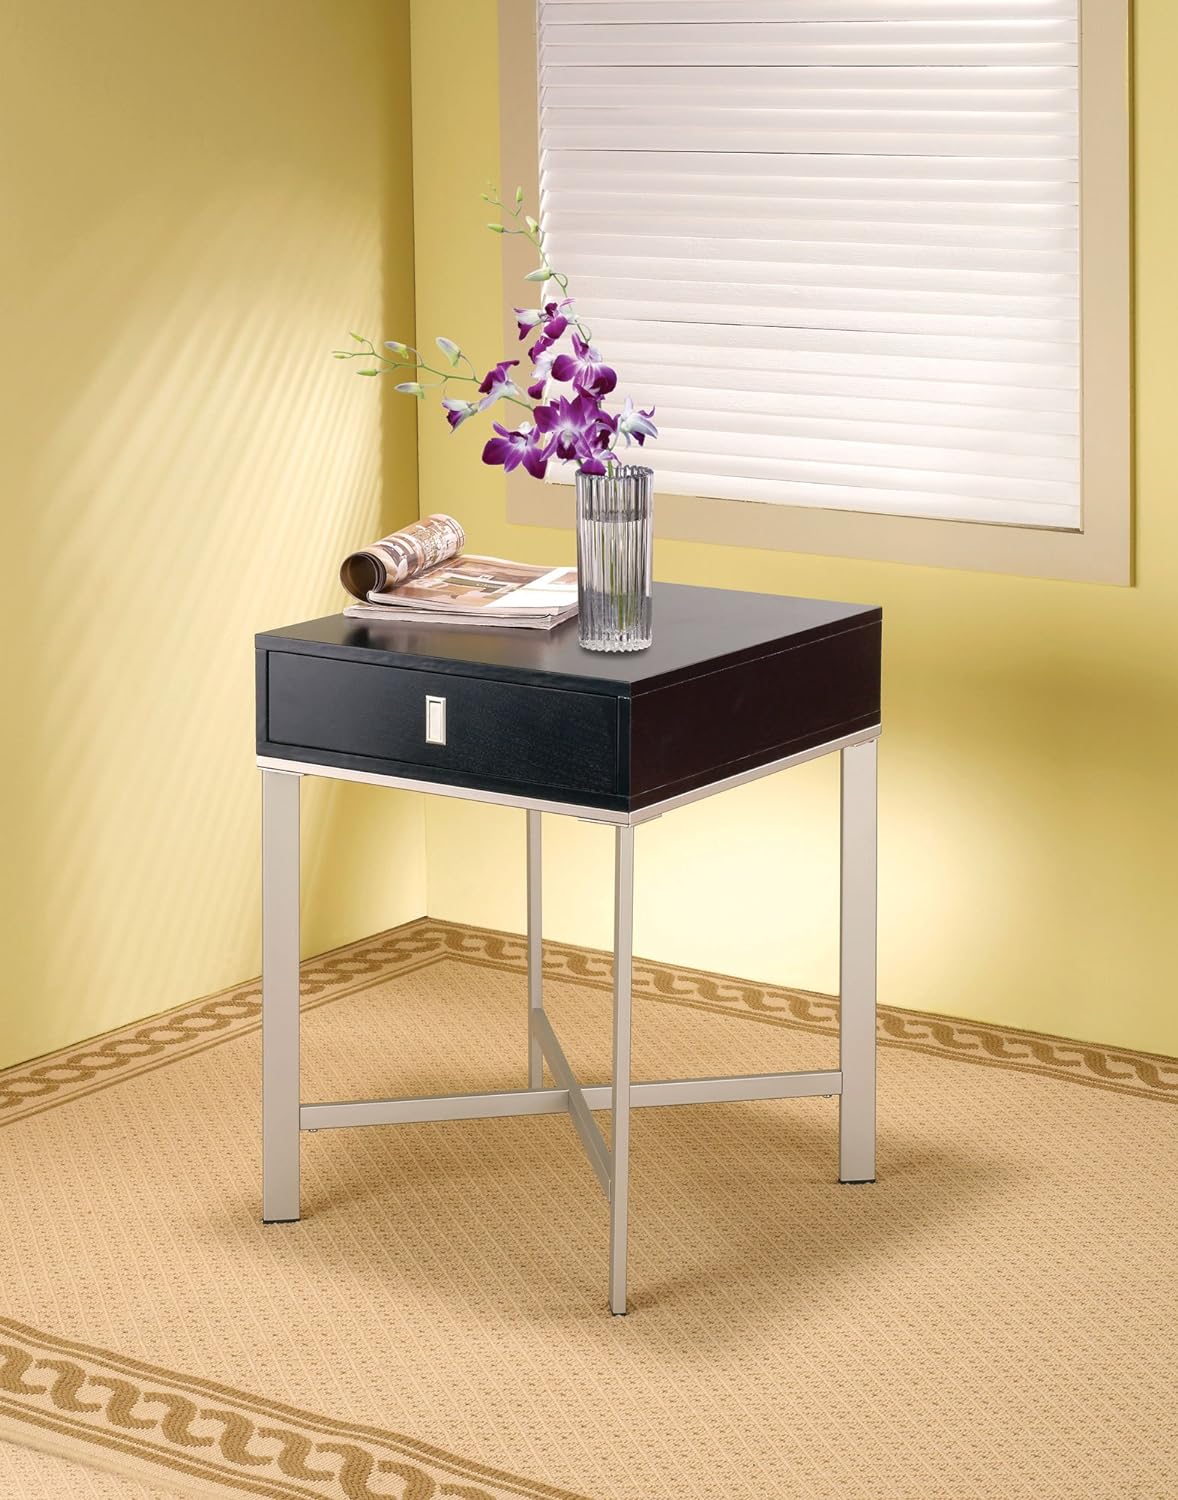 Modern Accent Table With Drawer And Nickel Legs in Espresso Finish